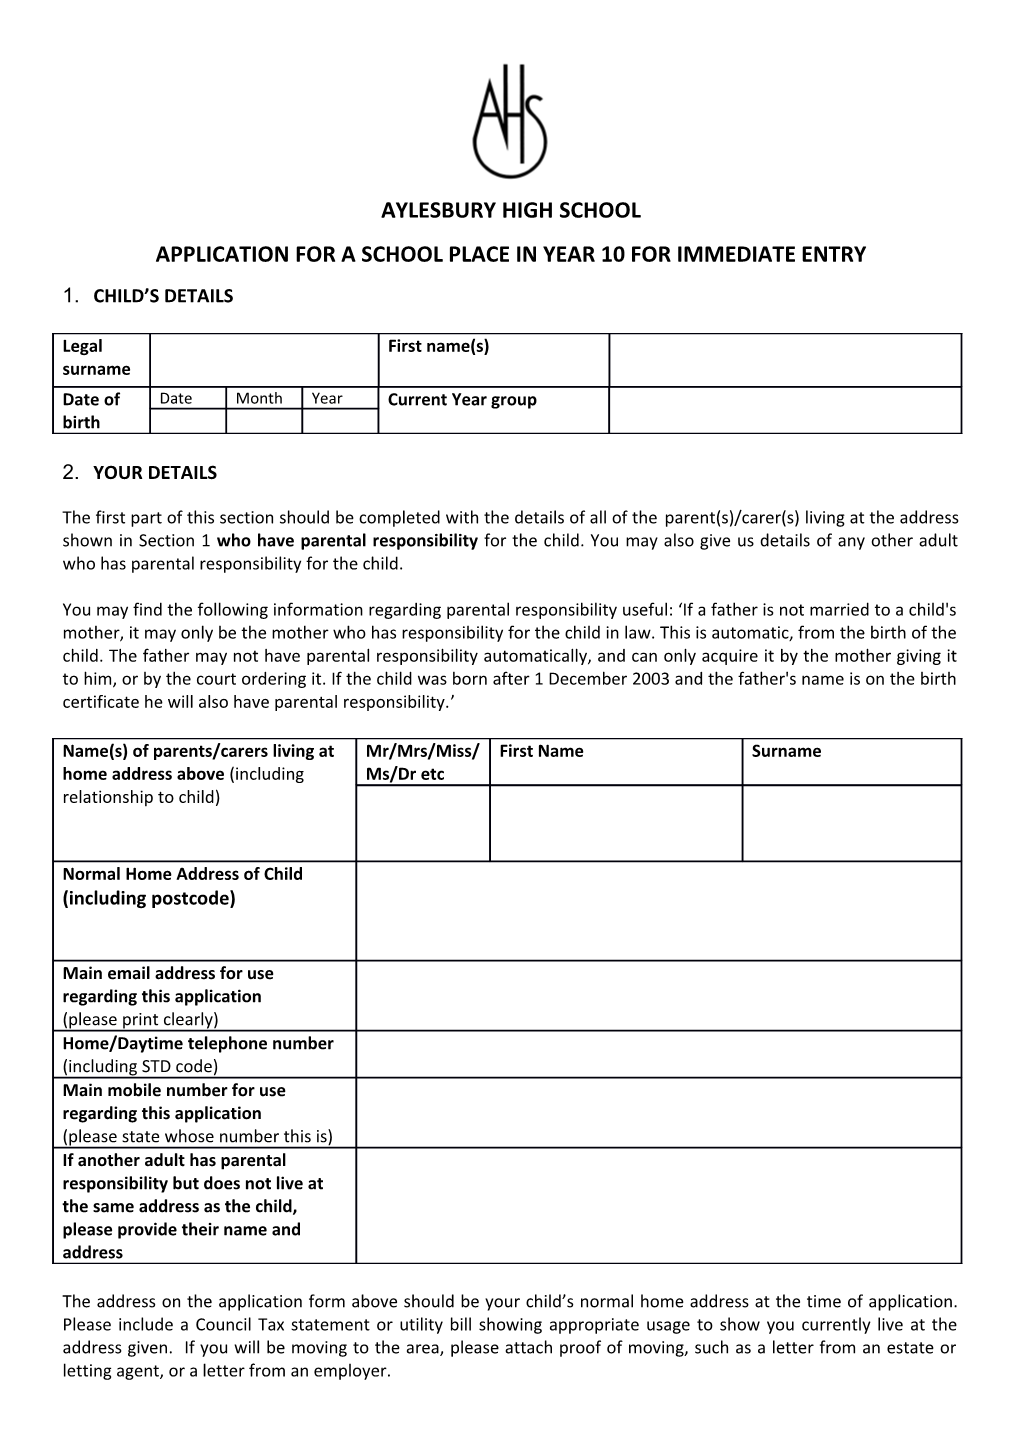 Application for a School Place in Year 10 for Immediateentry